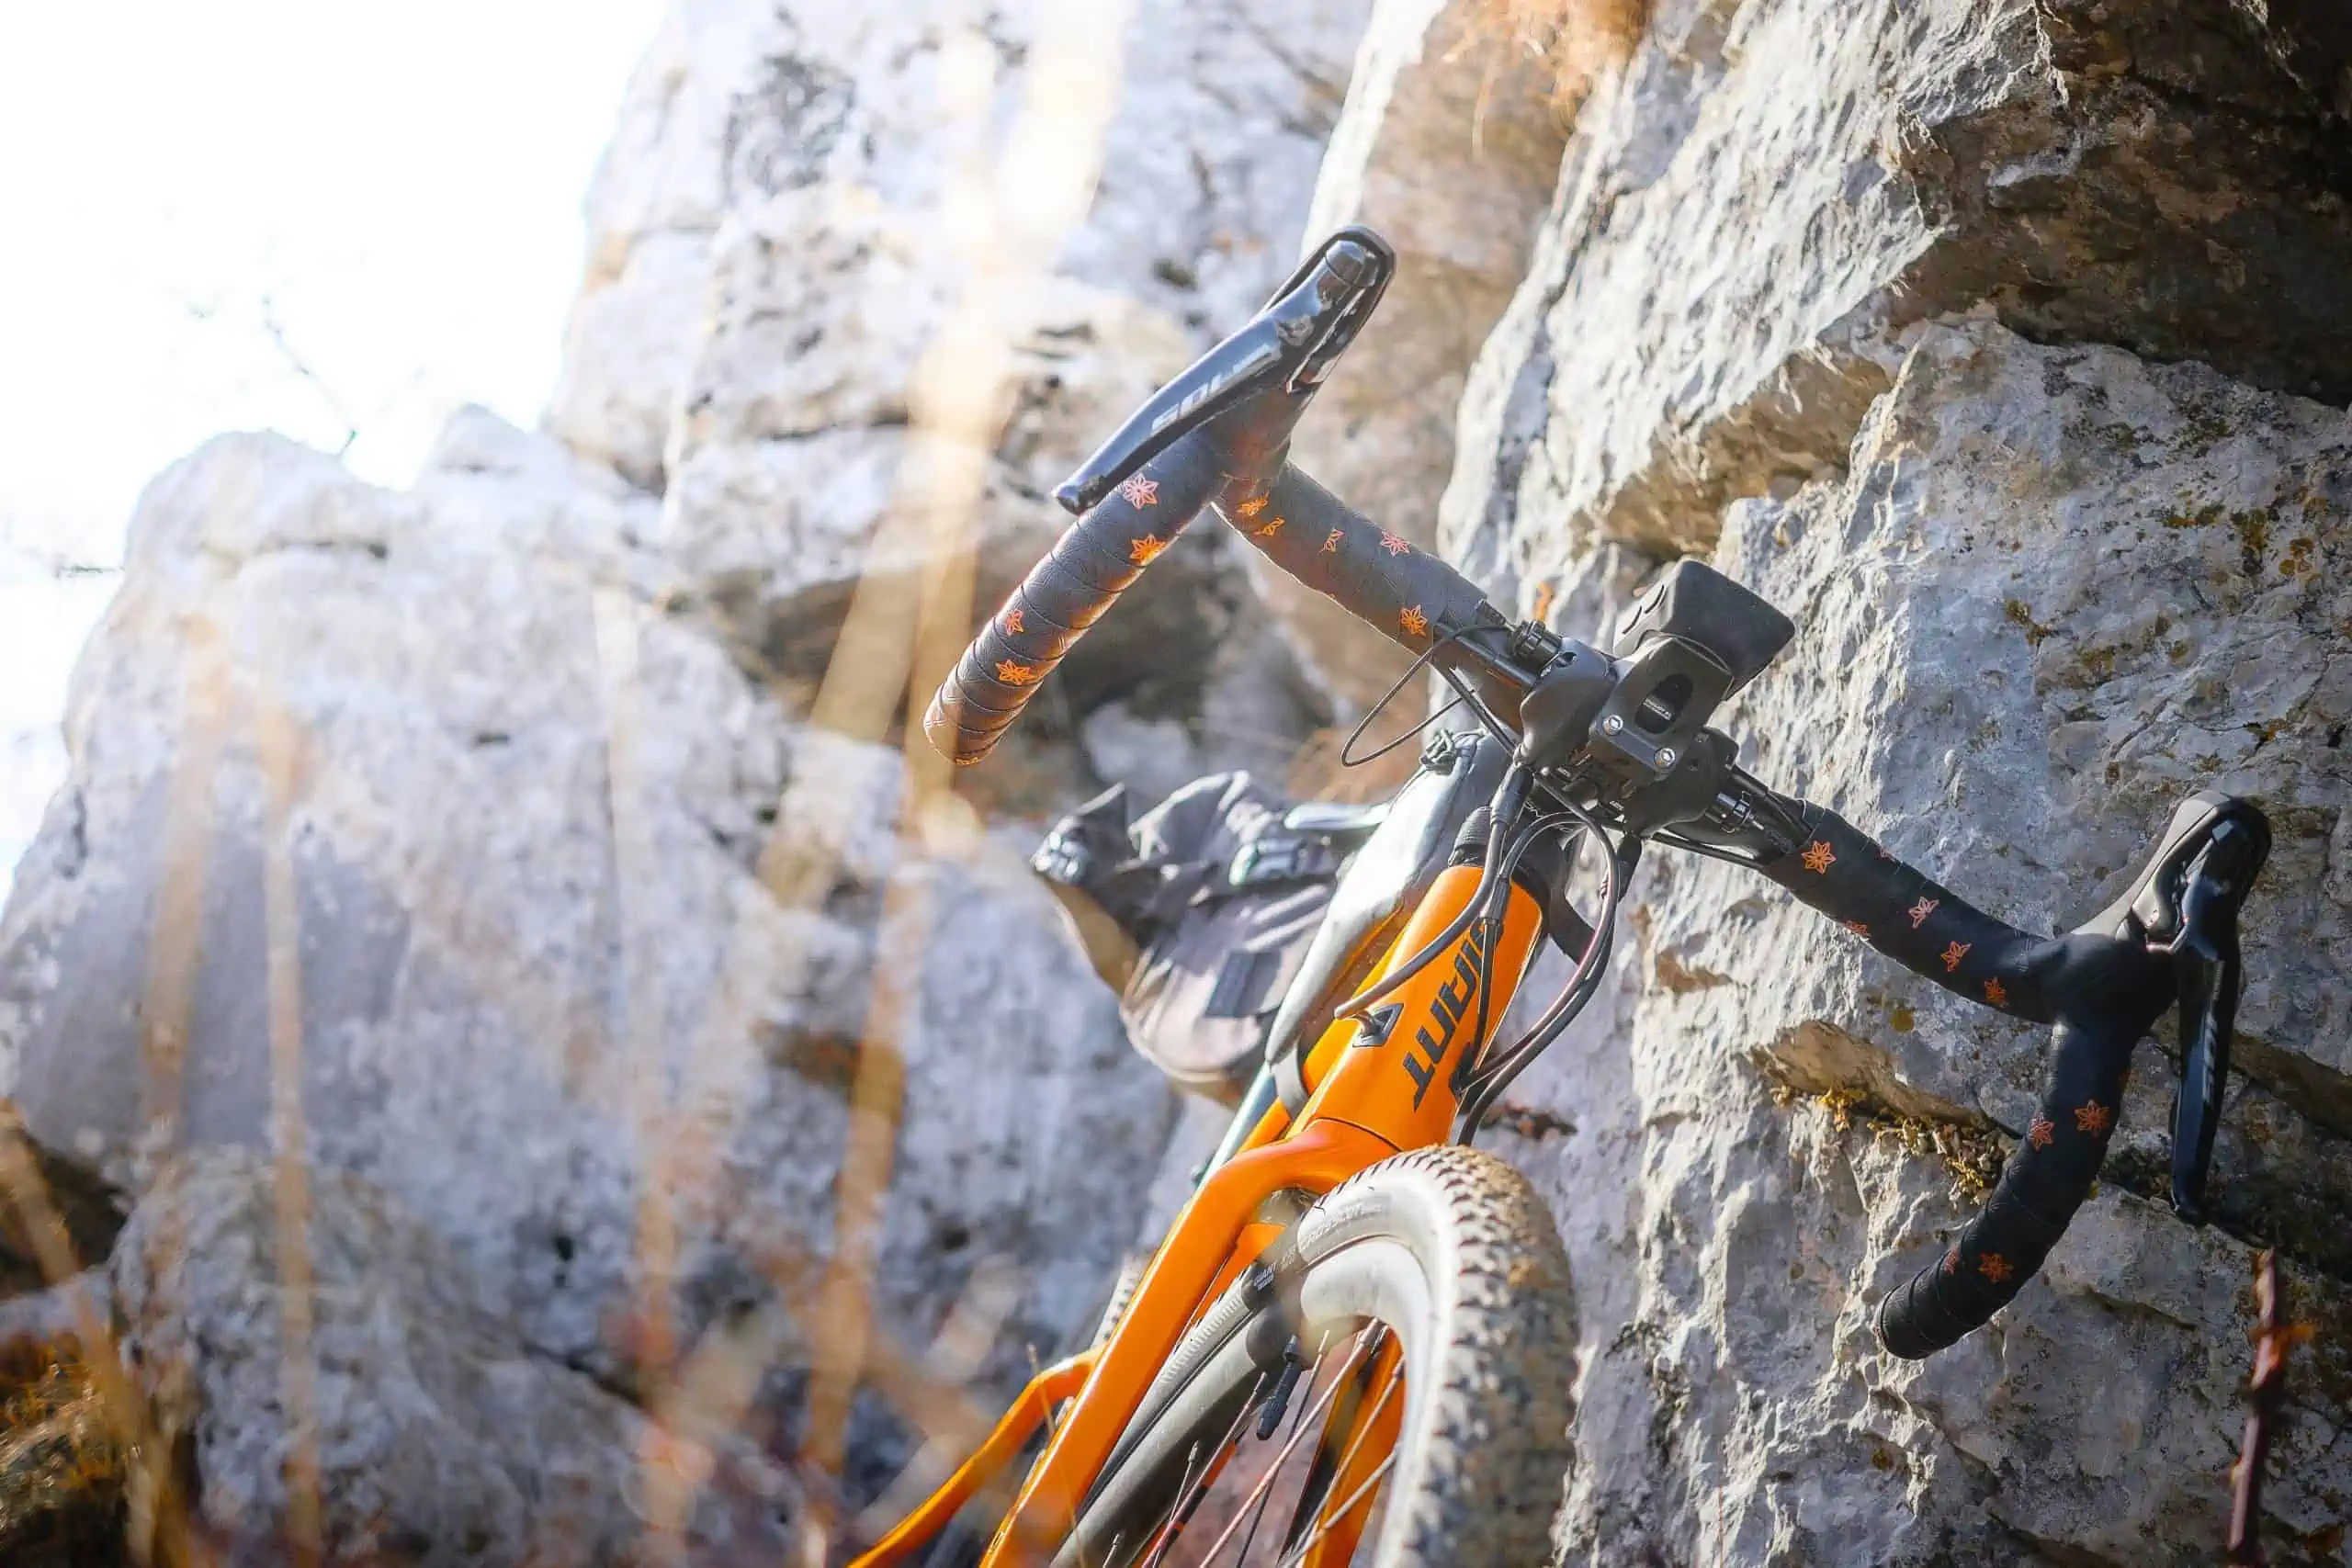 gravel road bikes integrate the benefits of both cyclocross and touring road bikes